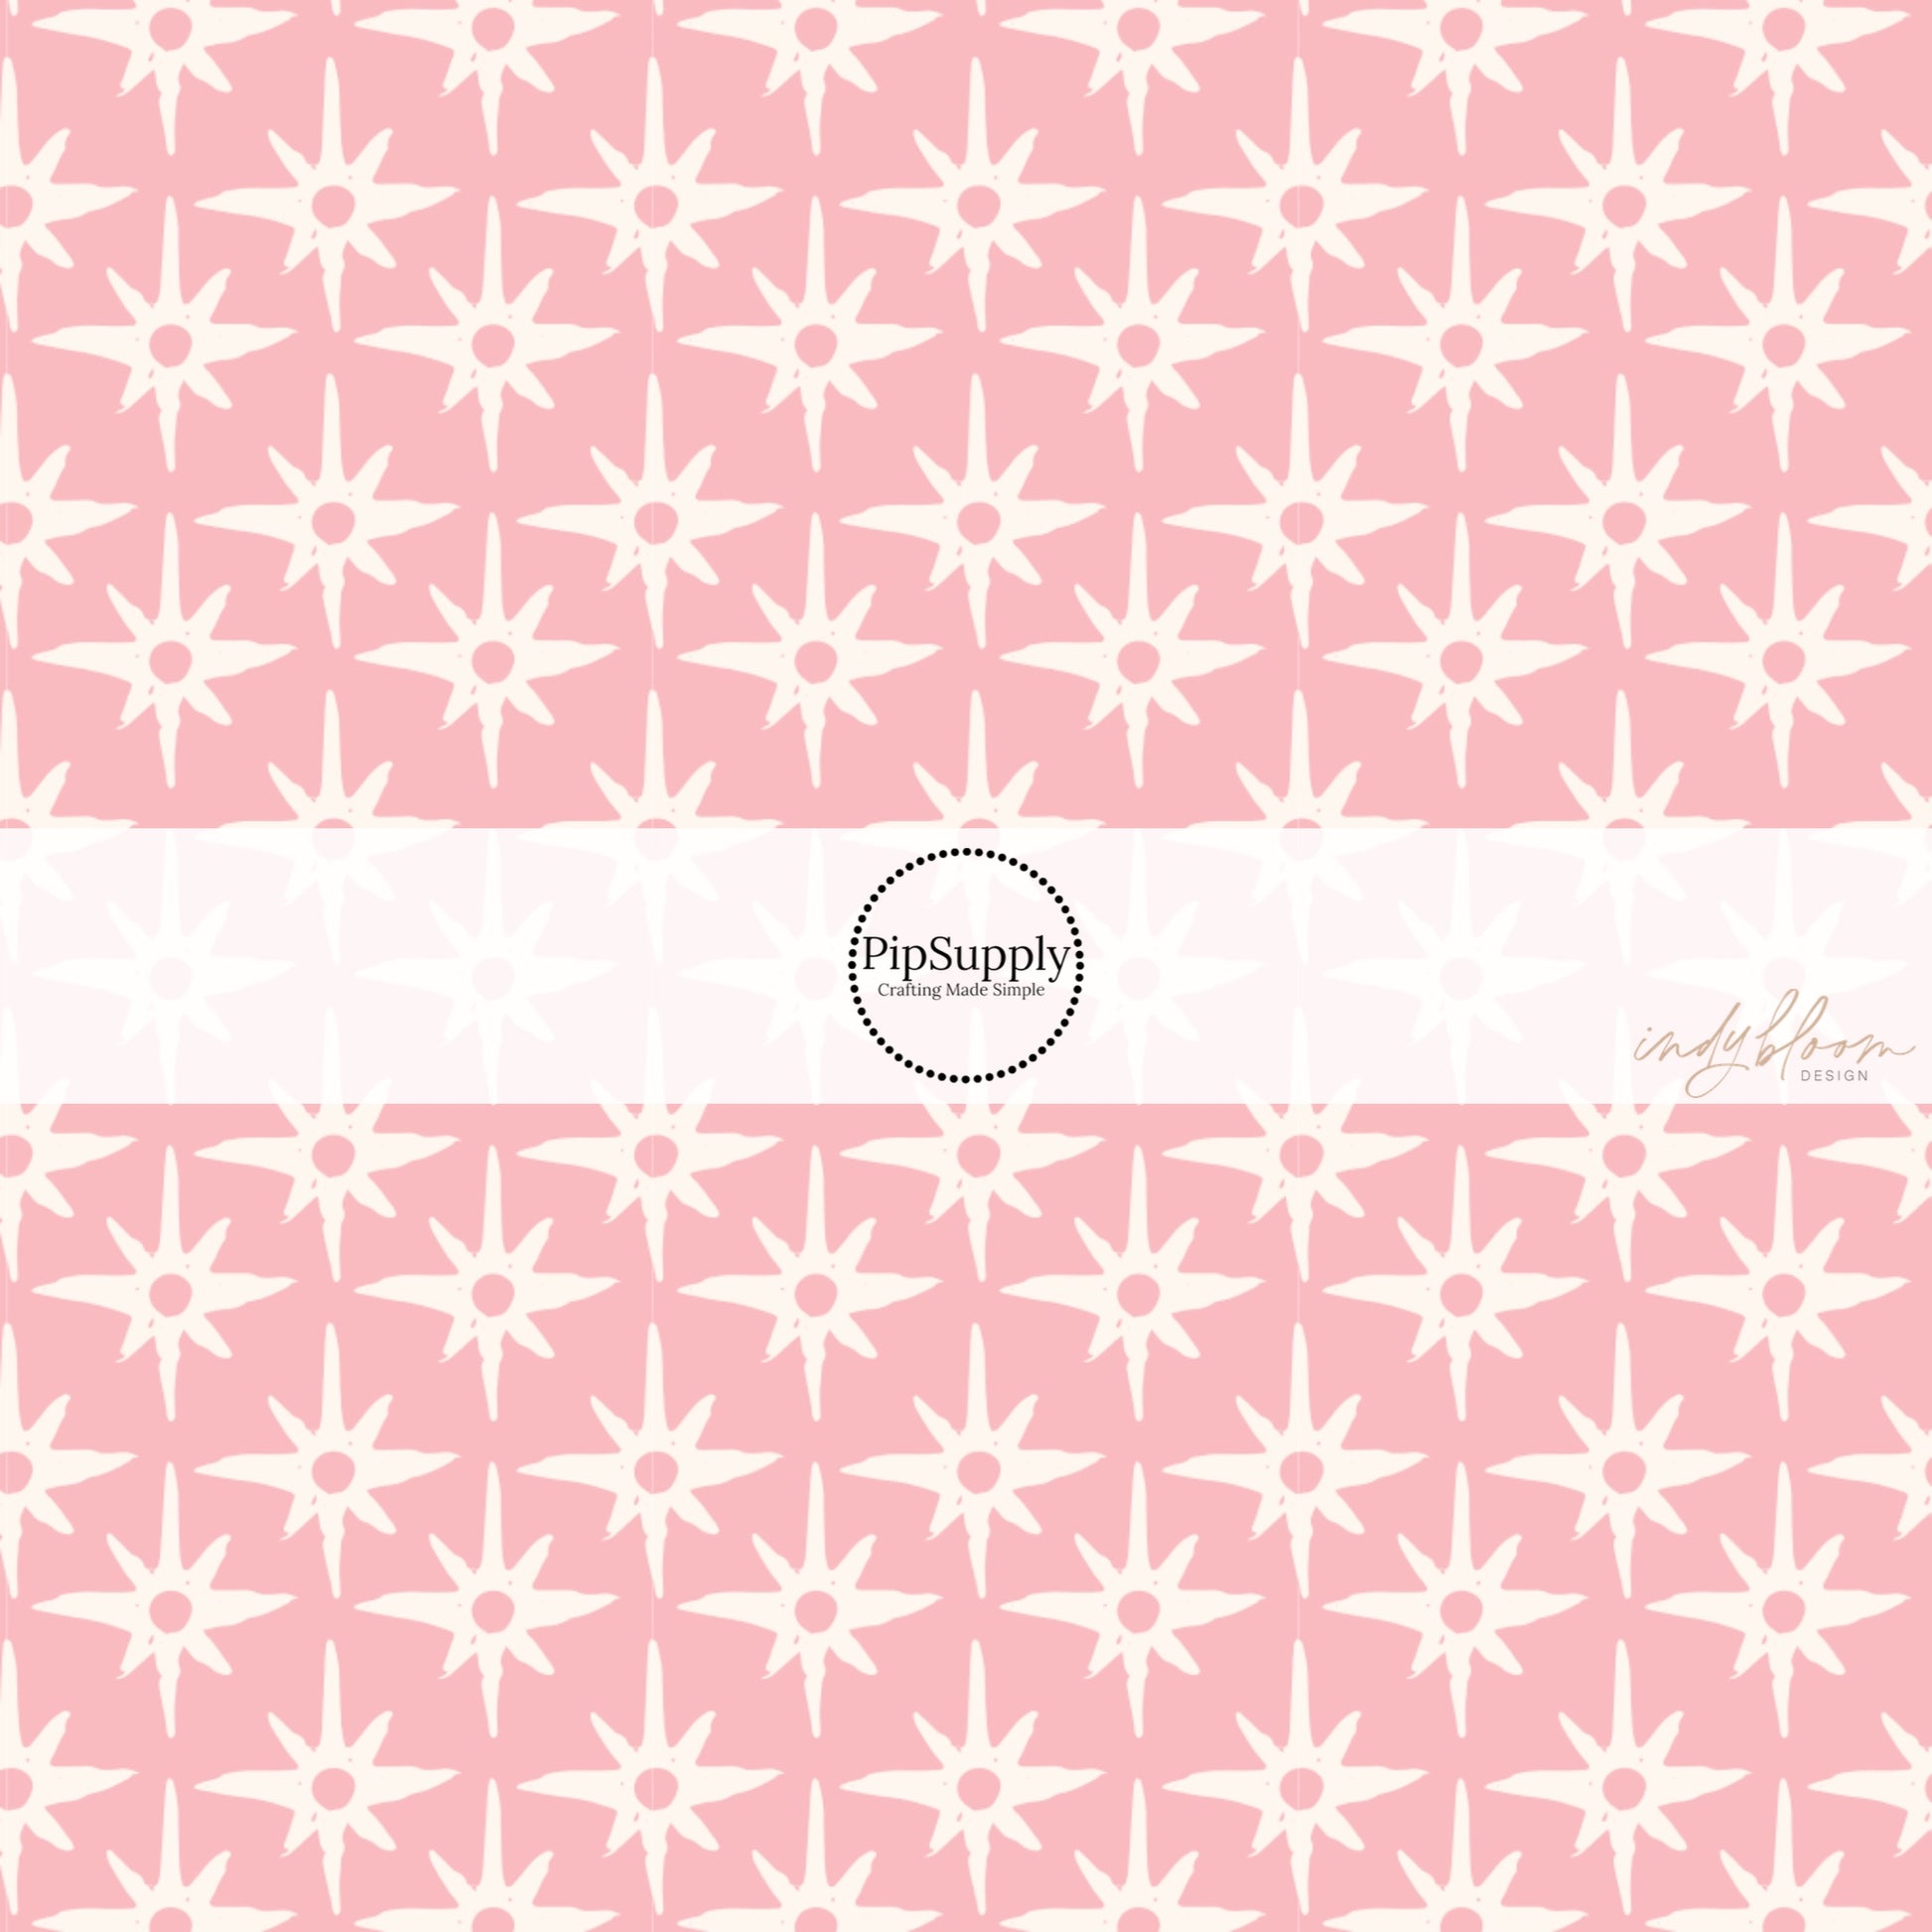 This summer fabric by the yard feature compass star pattern on pink. This fun summer themed fabric can be used for all your sewing and crafting needs!